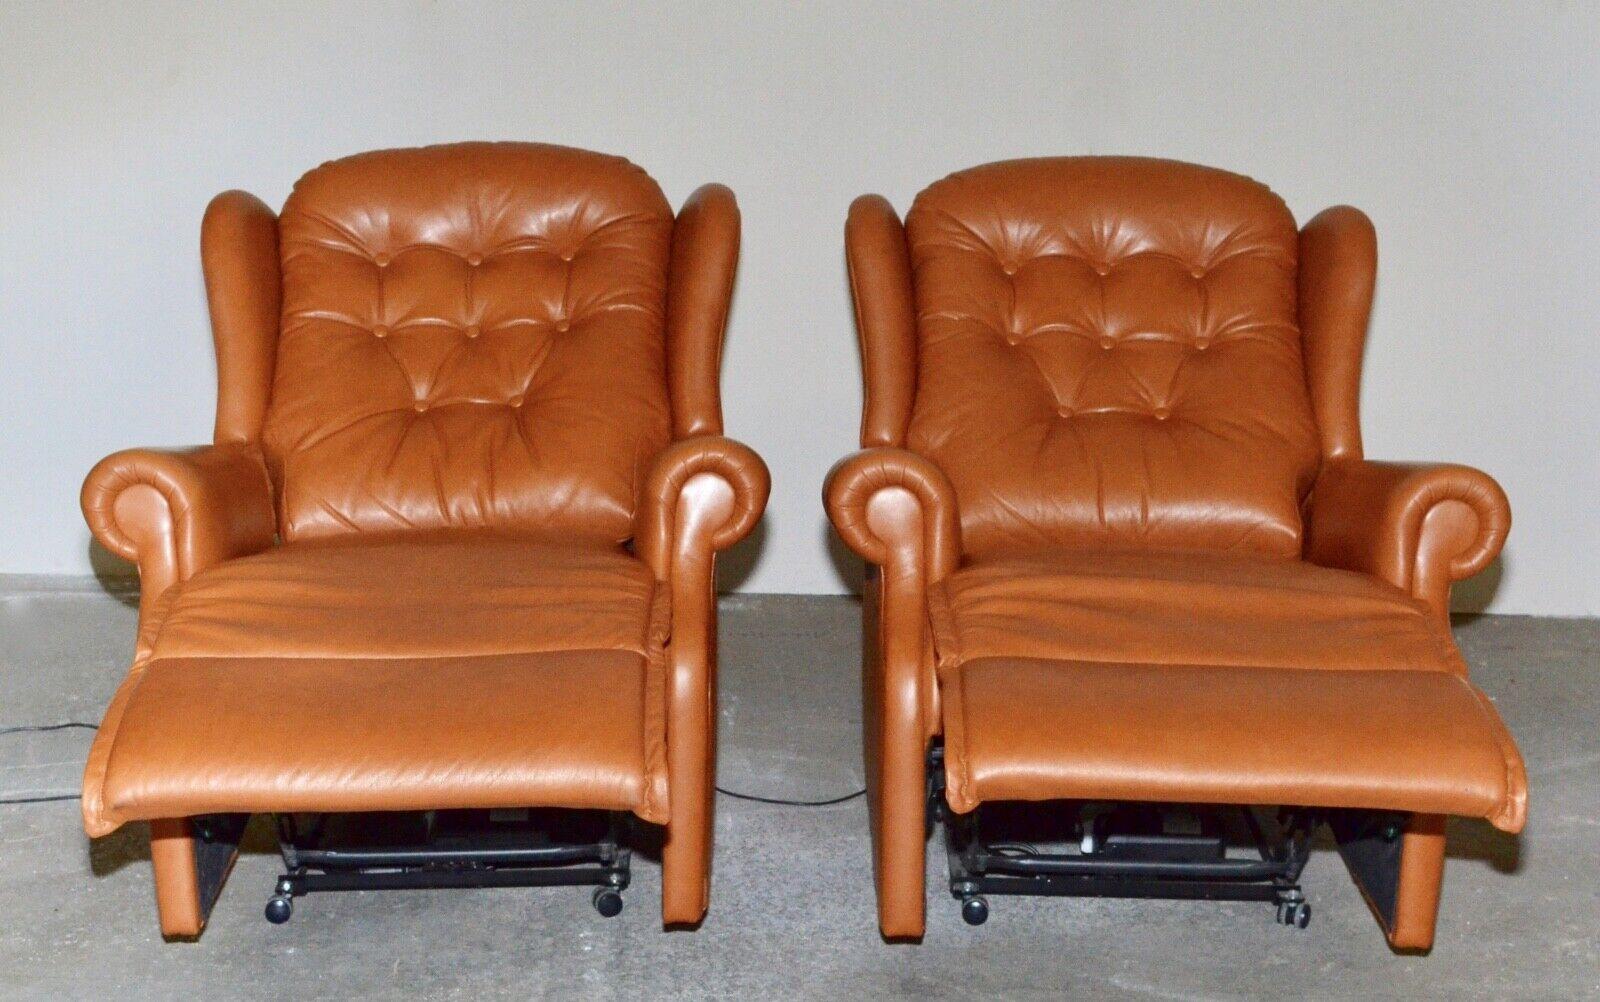 1 of 2 Tan Leather Electric Recliner Armchairs 3